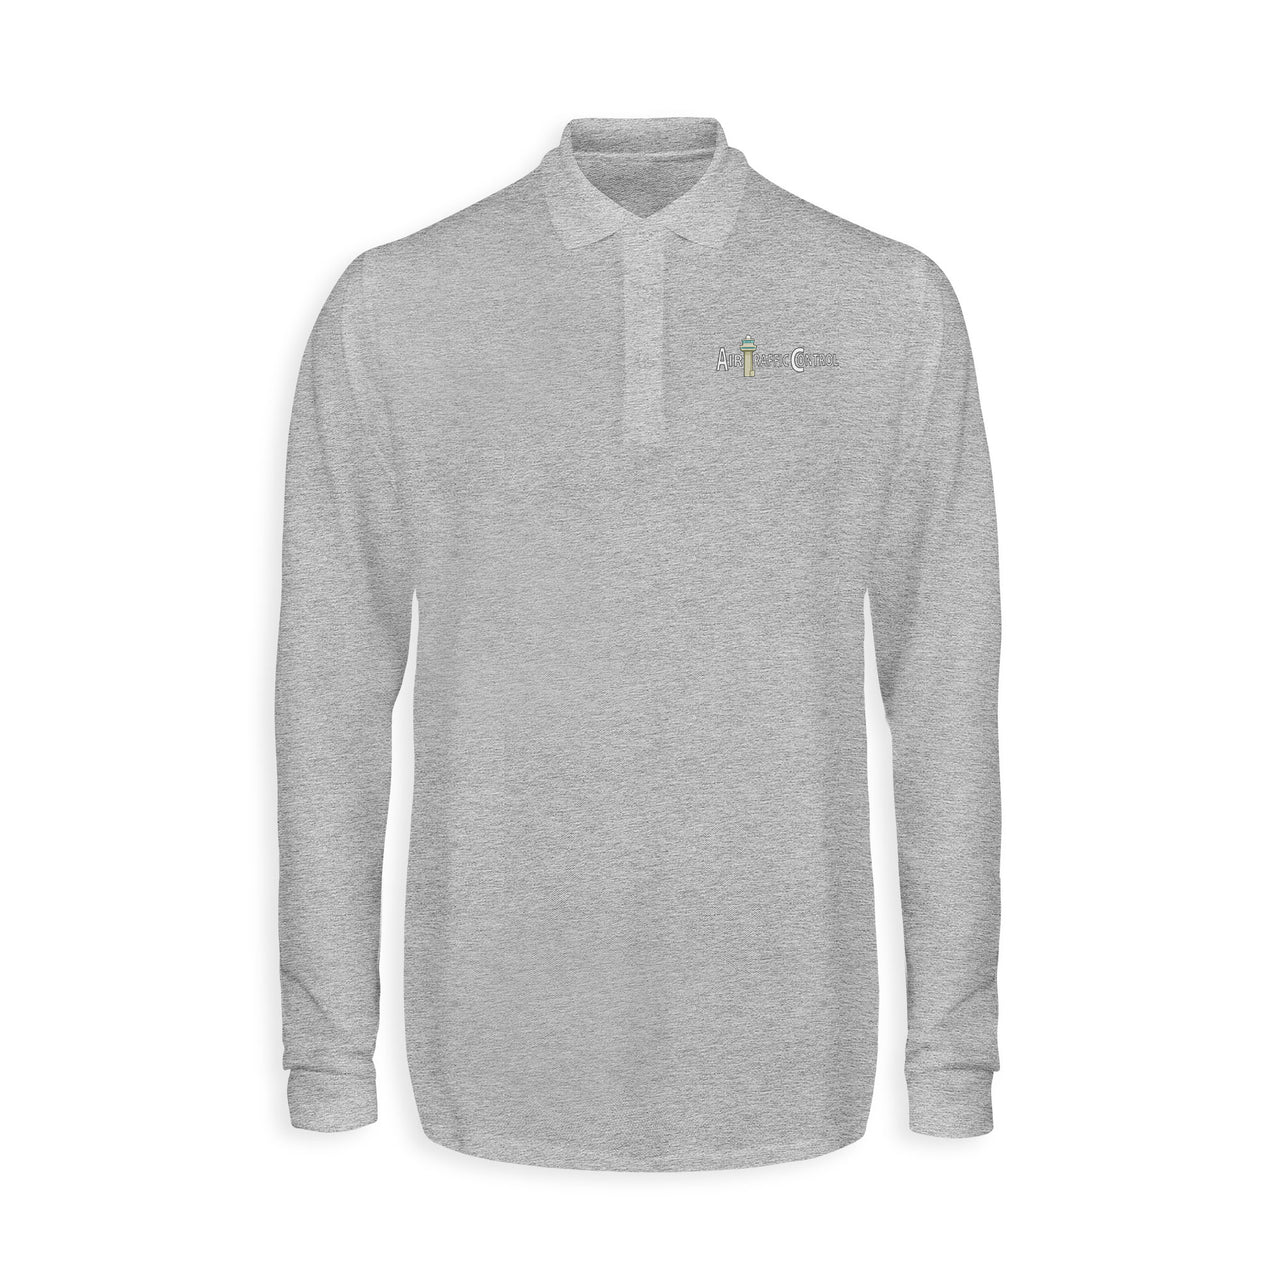 Air Traffic Control Designed Long Sleeve Polo T-Shirts